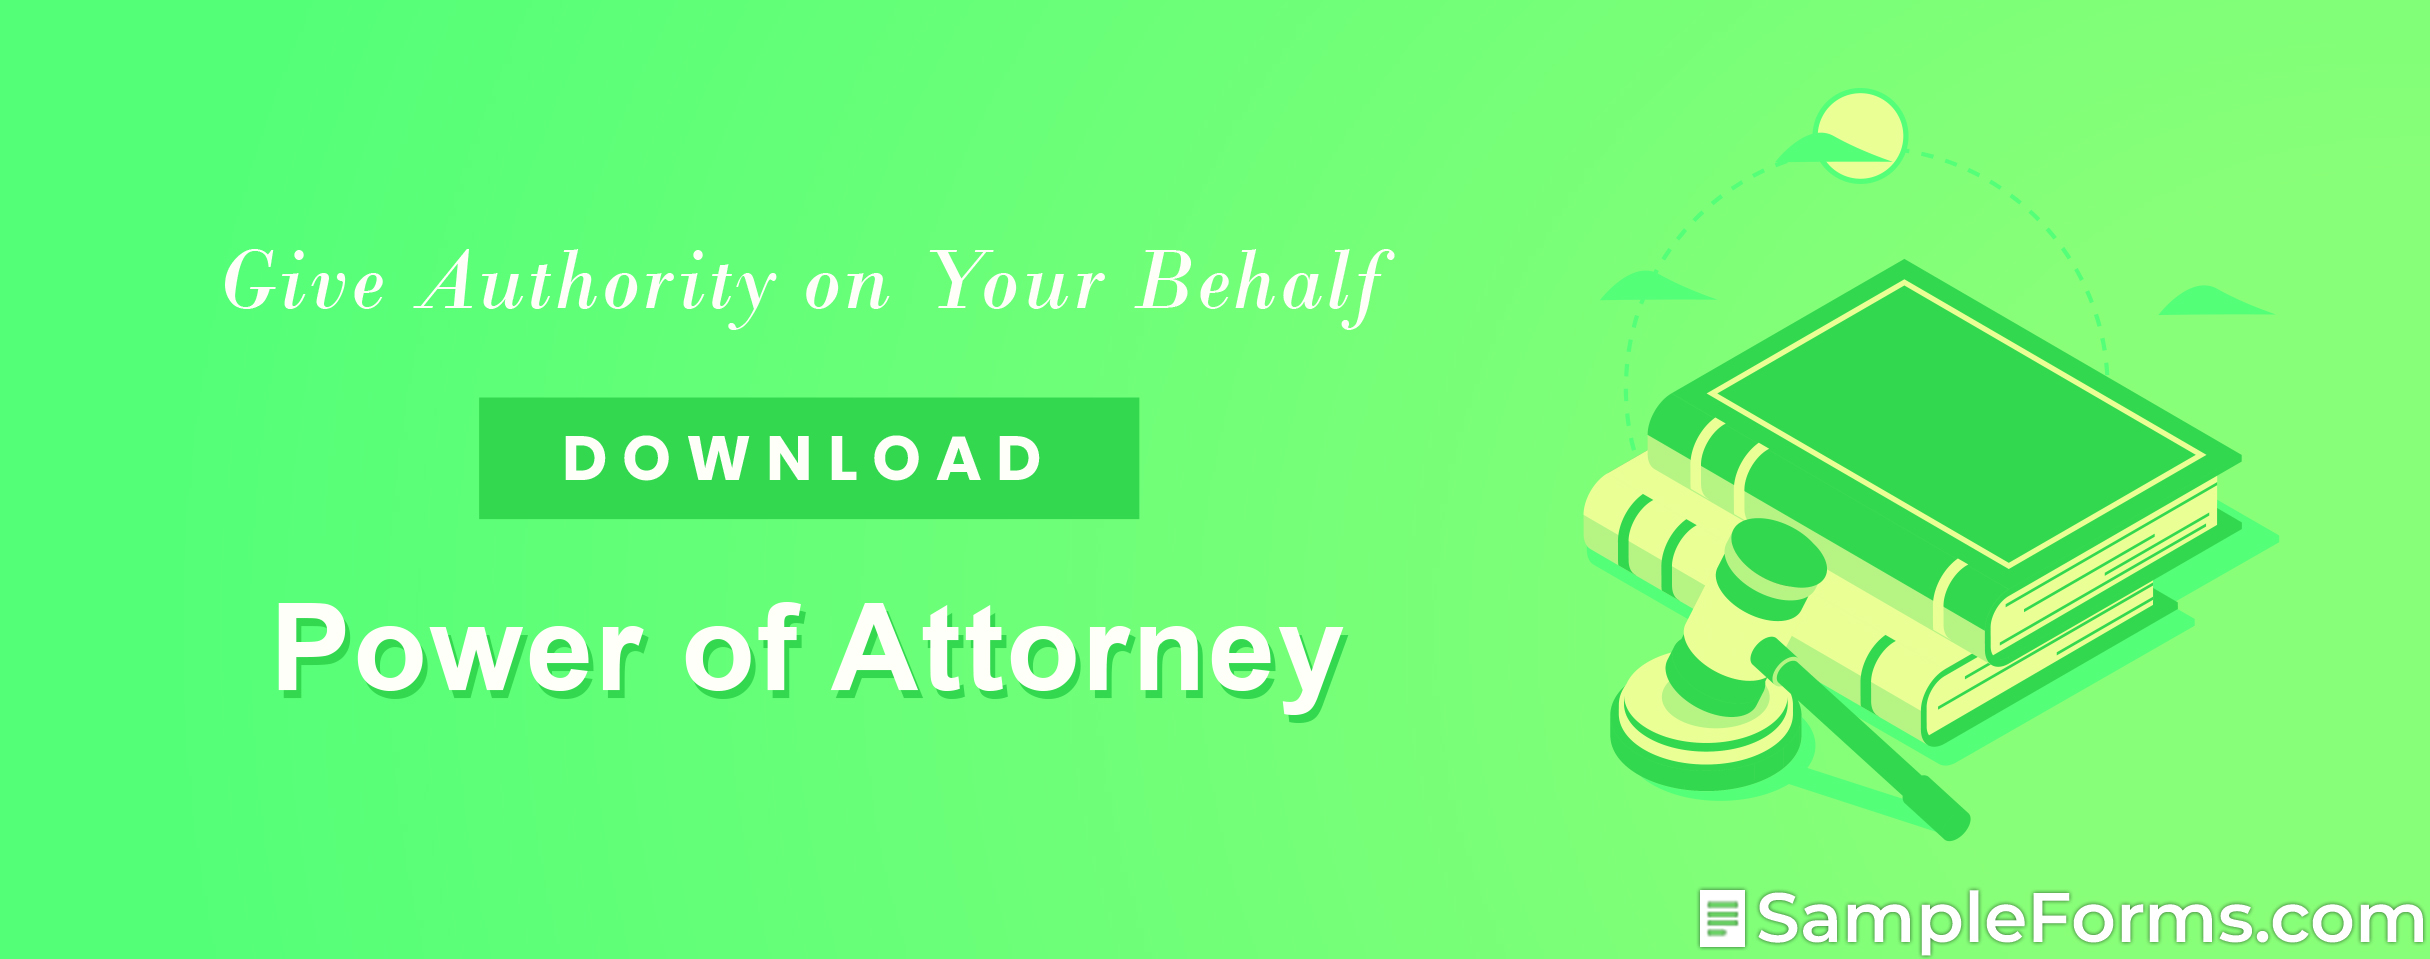 Power of Attorney Form